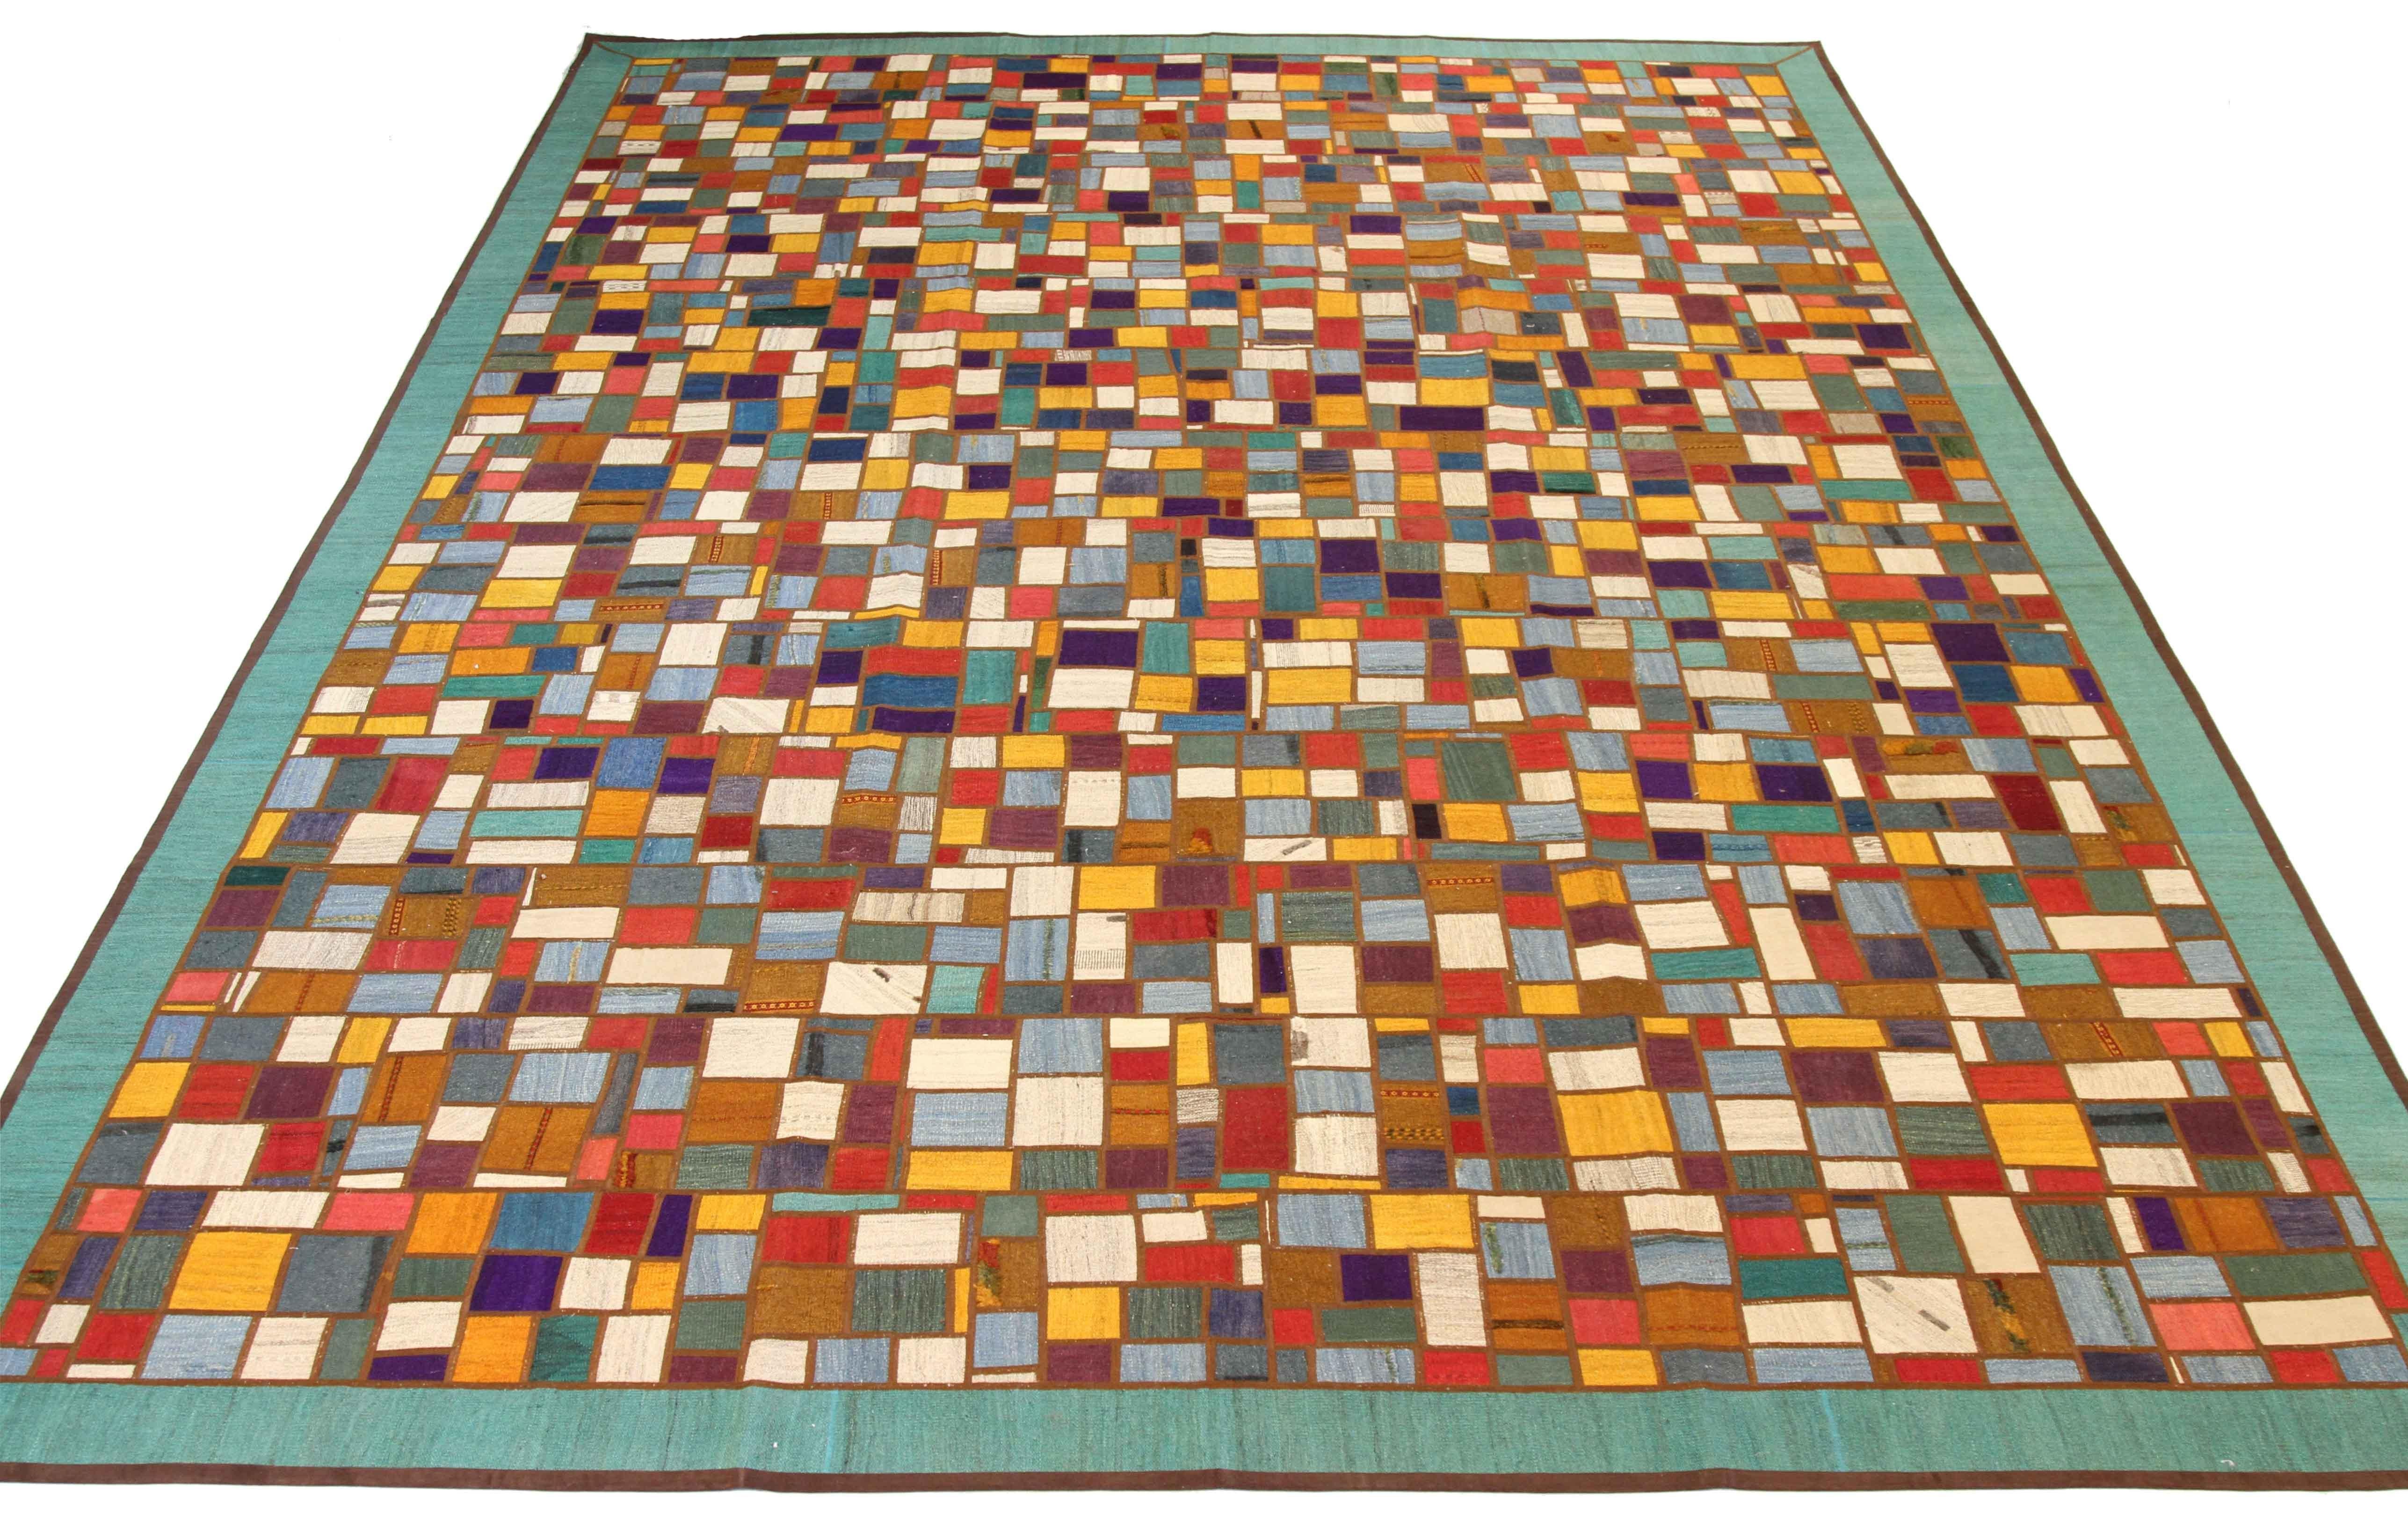 Modern Turkish rug handwoven from the finest sheep’s wool and colored with all-natural vegetable dyes that are safe for humans and pets. It’s a traditional Patch Kilim flat-weave design featuring colored squares on an ivory field. It’s a stunning